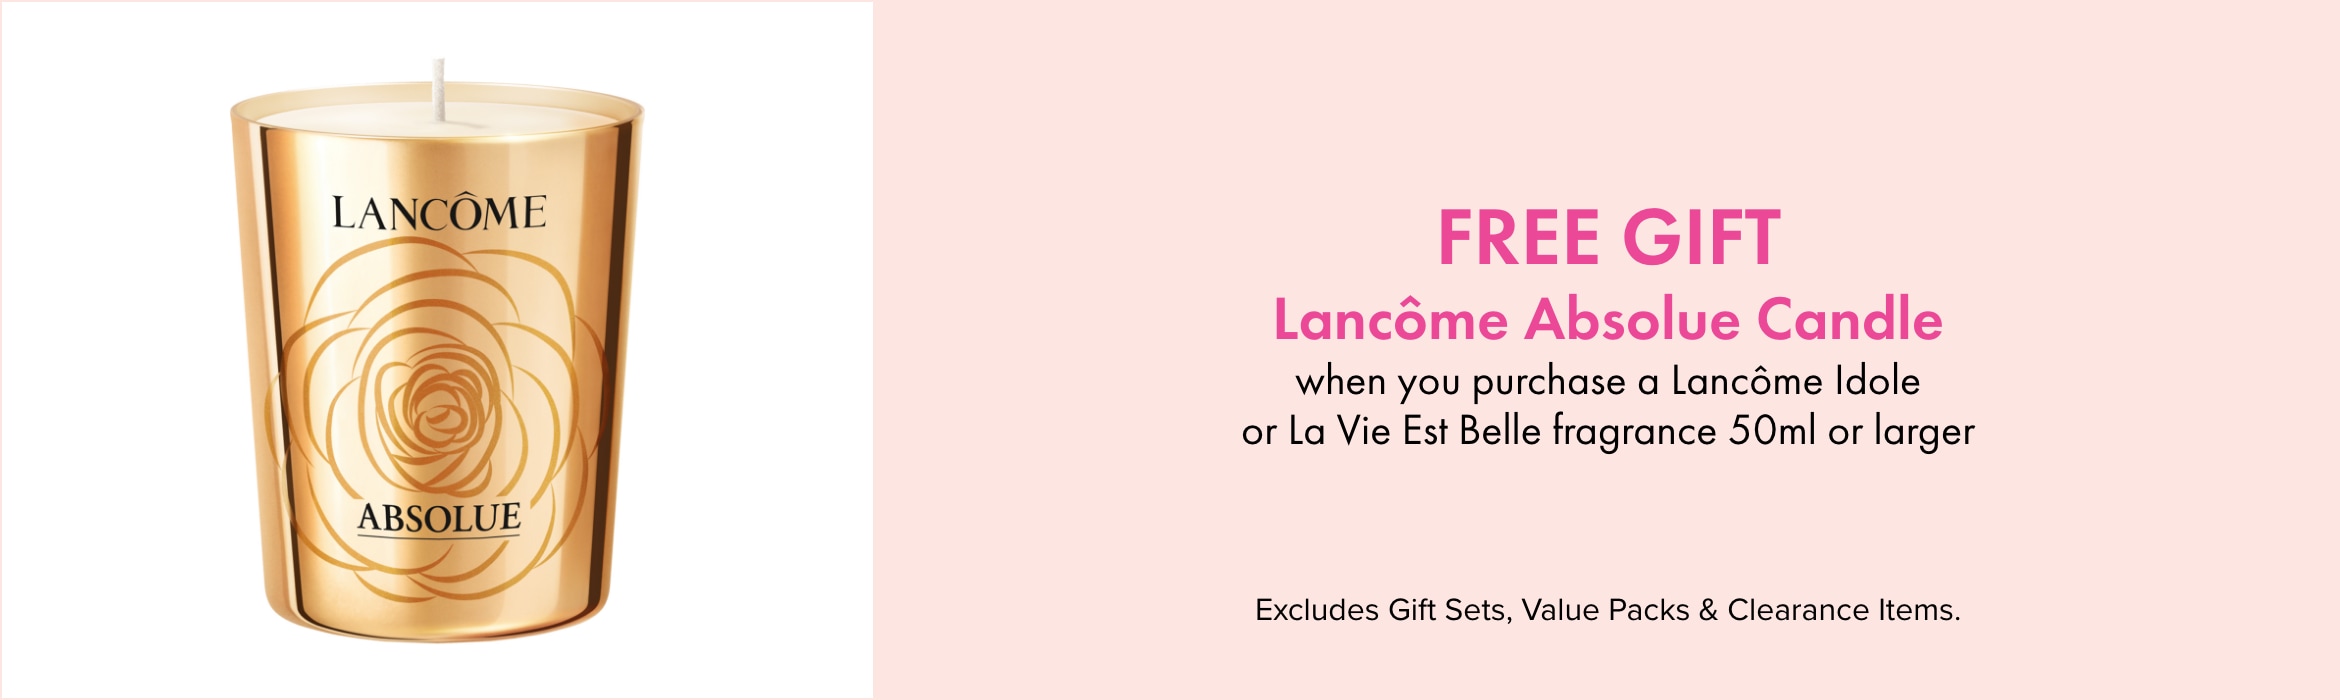 FREE GIFT Lancôme Absolue candle